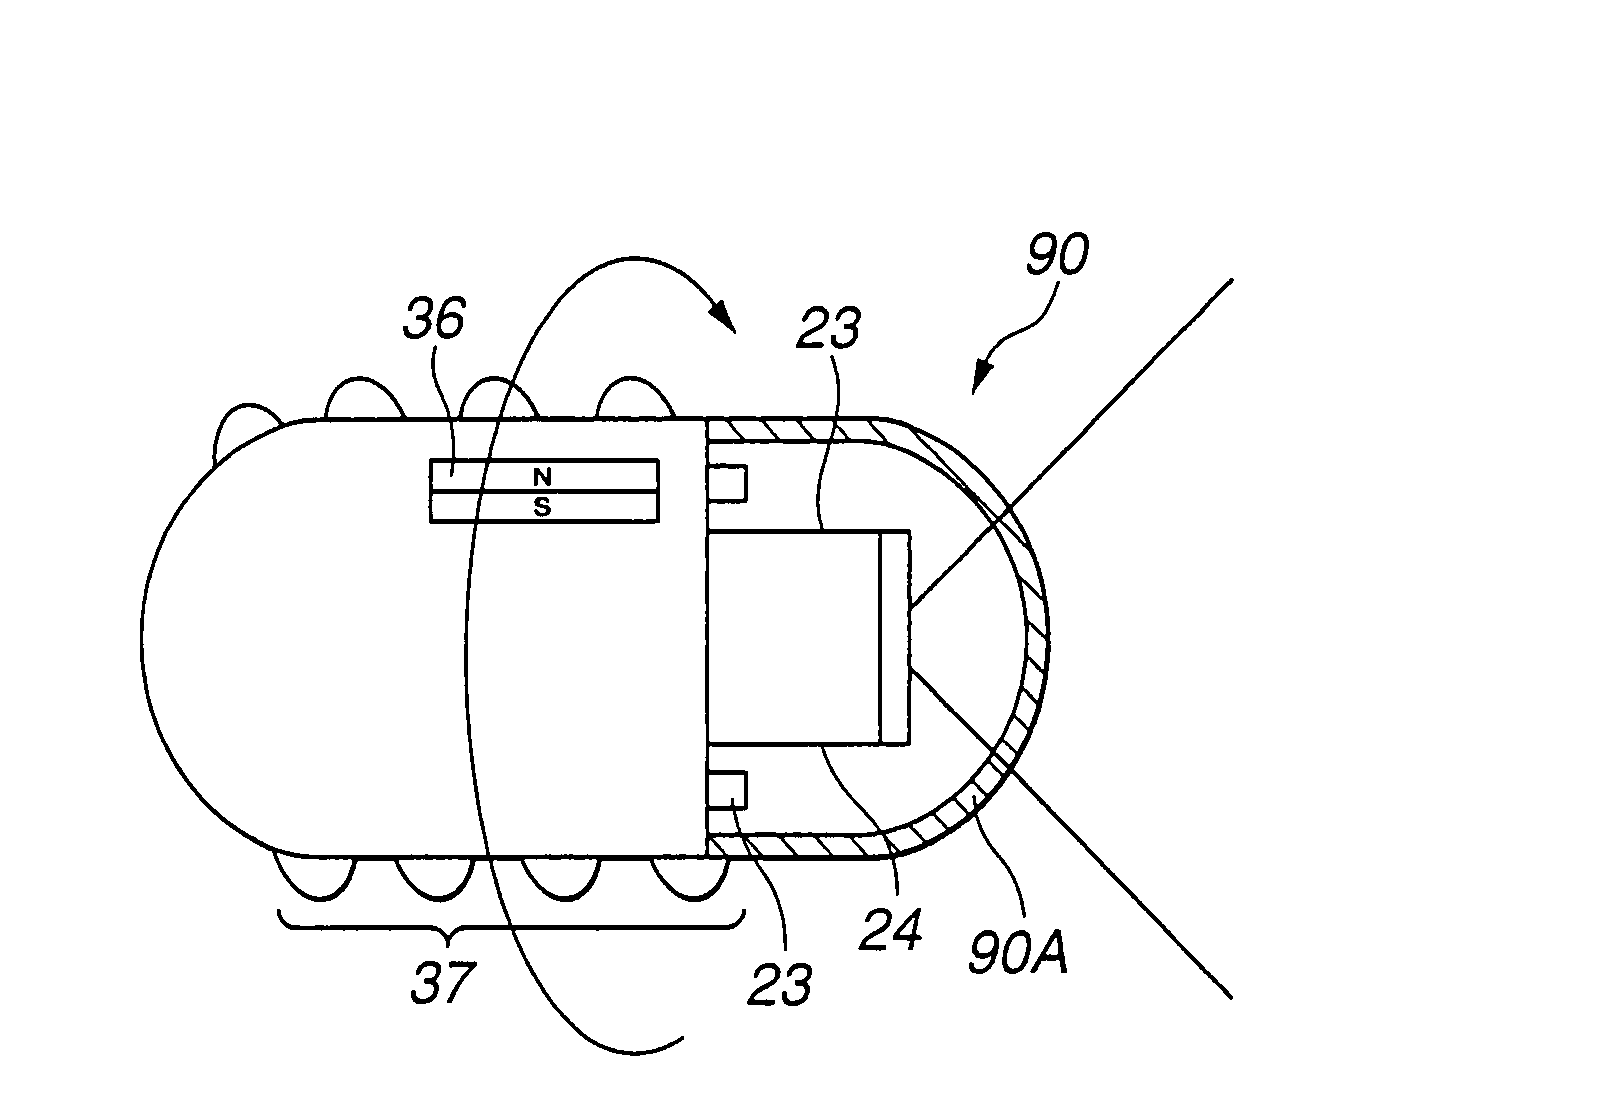 Capsule-type medical device